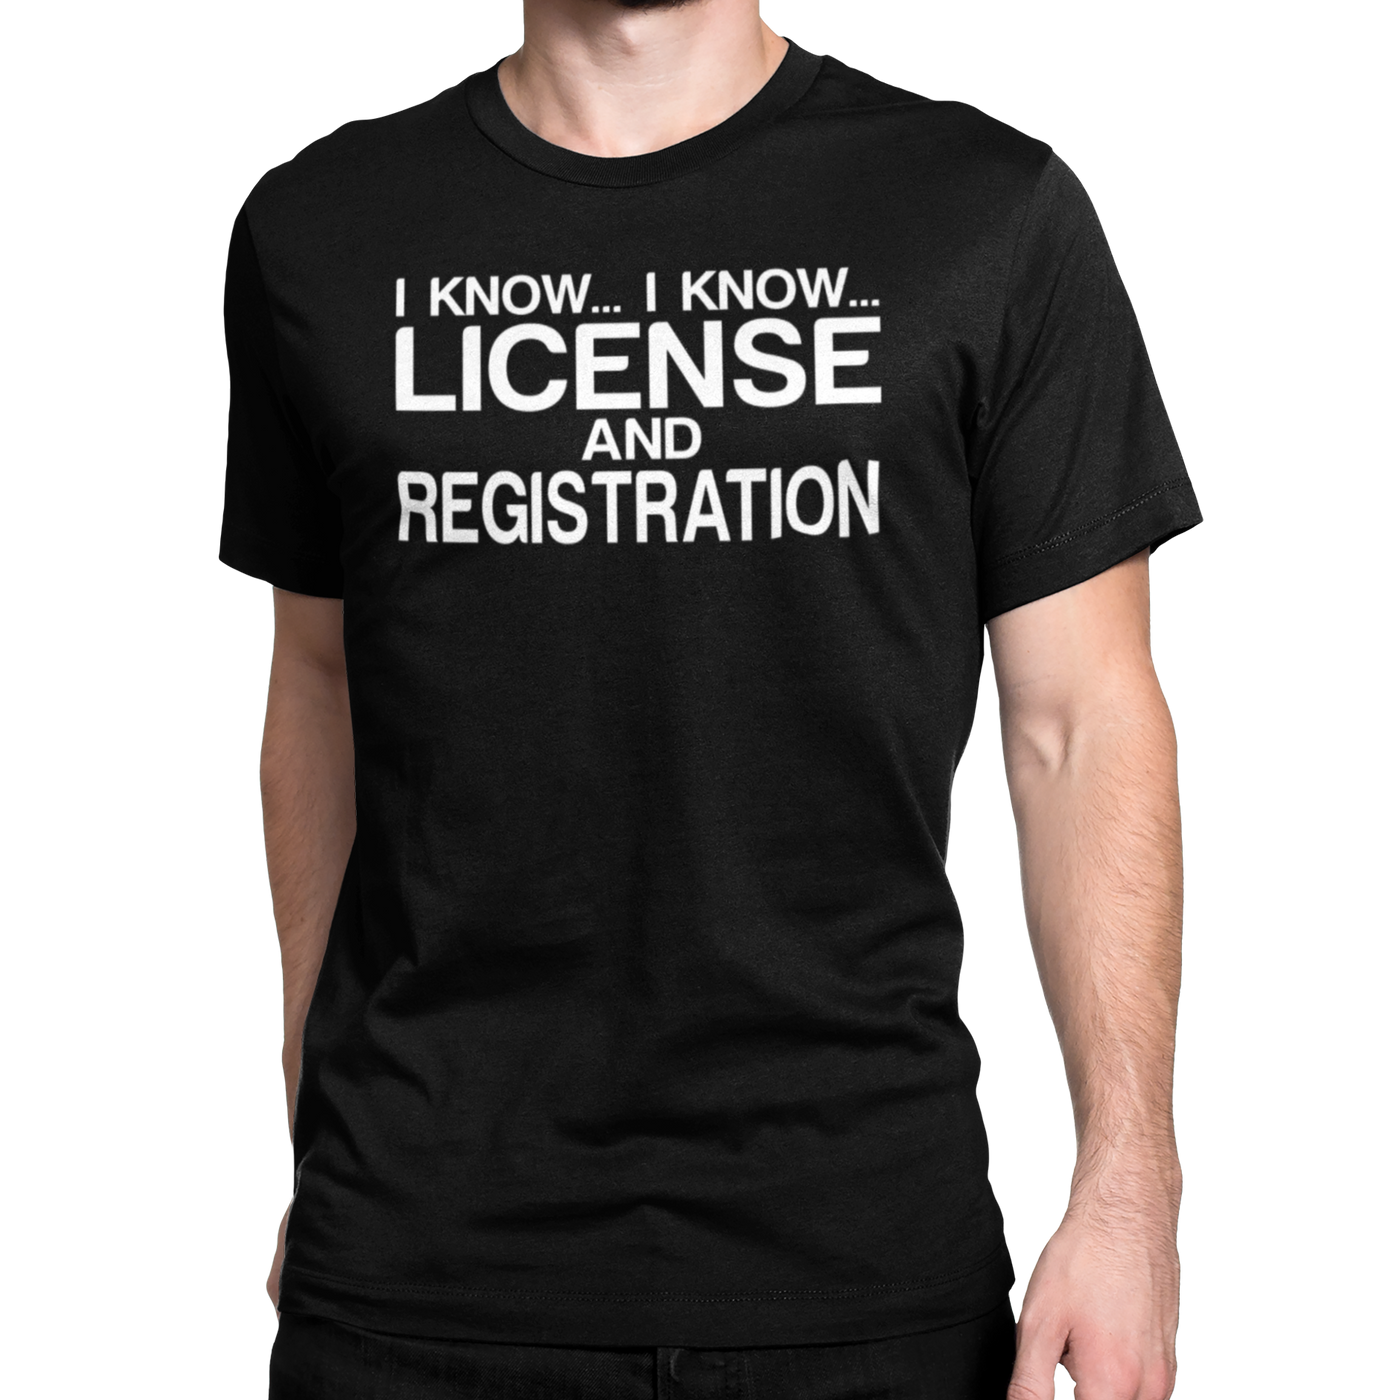 I KNOW I KNOW LICENSE AND REGISTRATION T-shirt